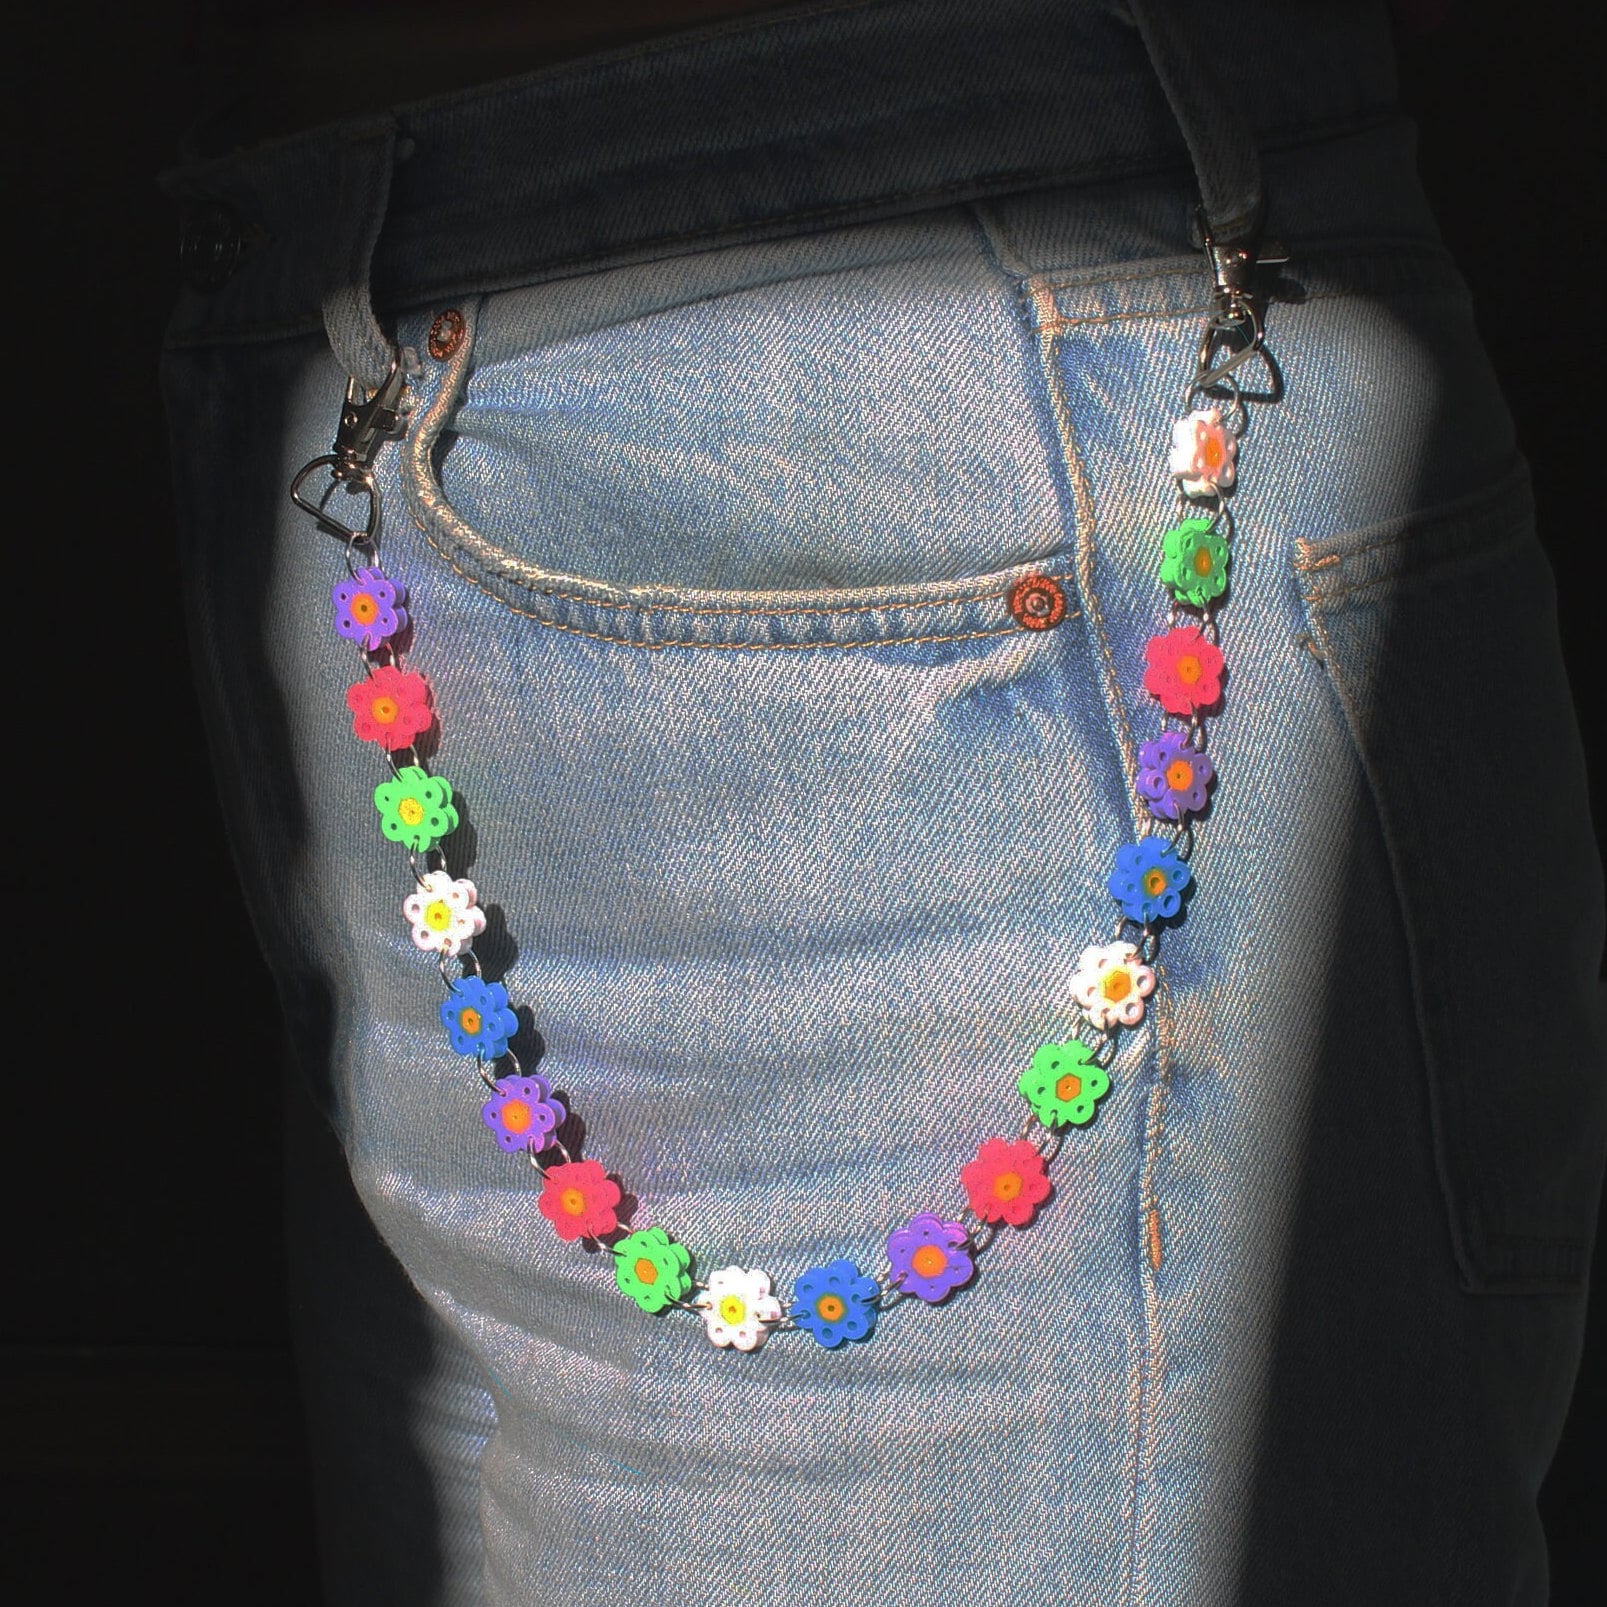 Buy Neon Daisy Jean Chain Super Cute and Fun Perler Bead Daisy Jean Chains  22 Inches Long With Heavy Duty Jump Rings and Extra Flowers Online in India  